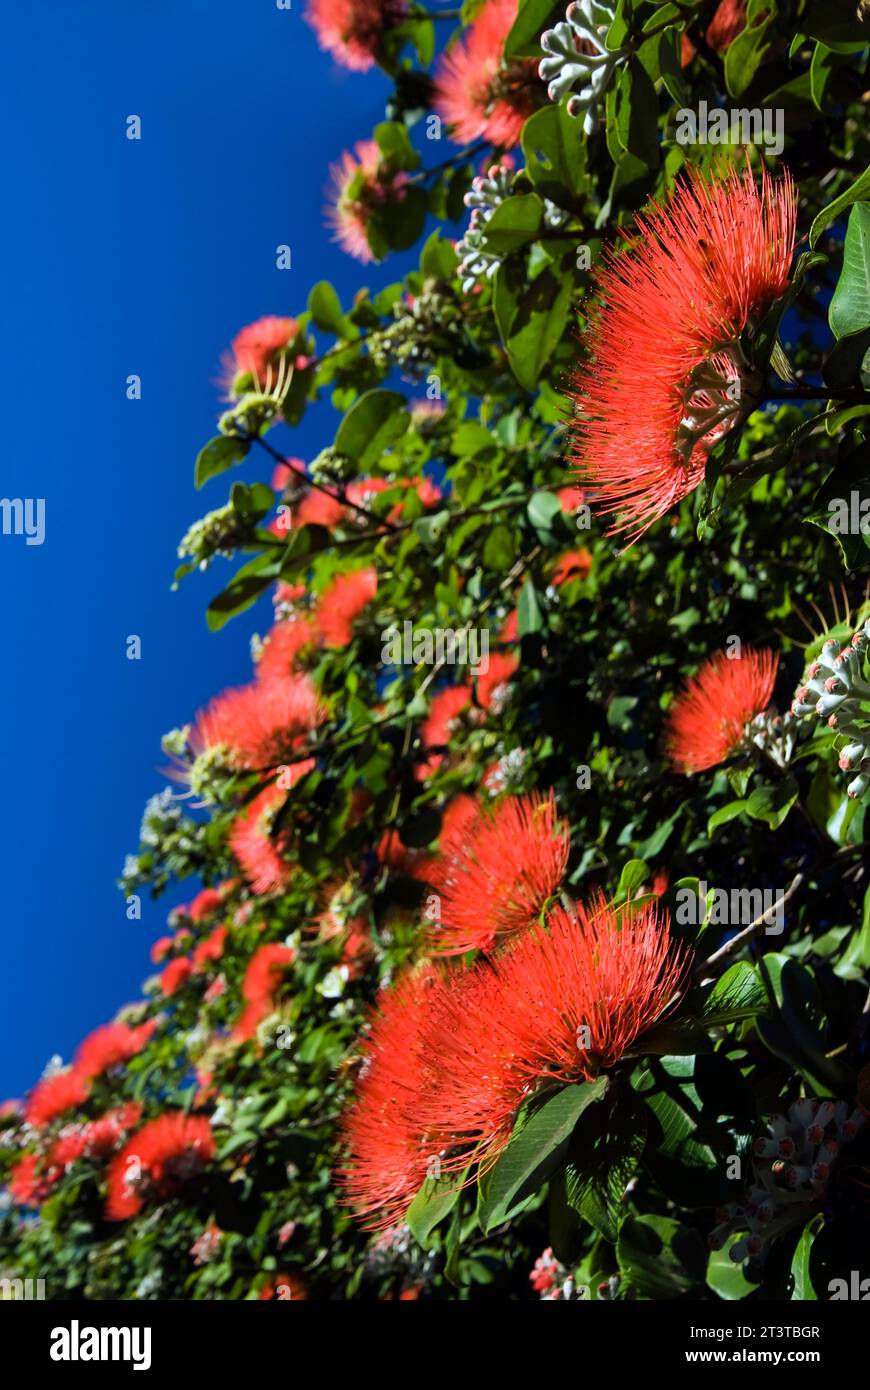 Close up view of pohutukawa flower in bloom against blue sky Stock Photo